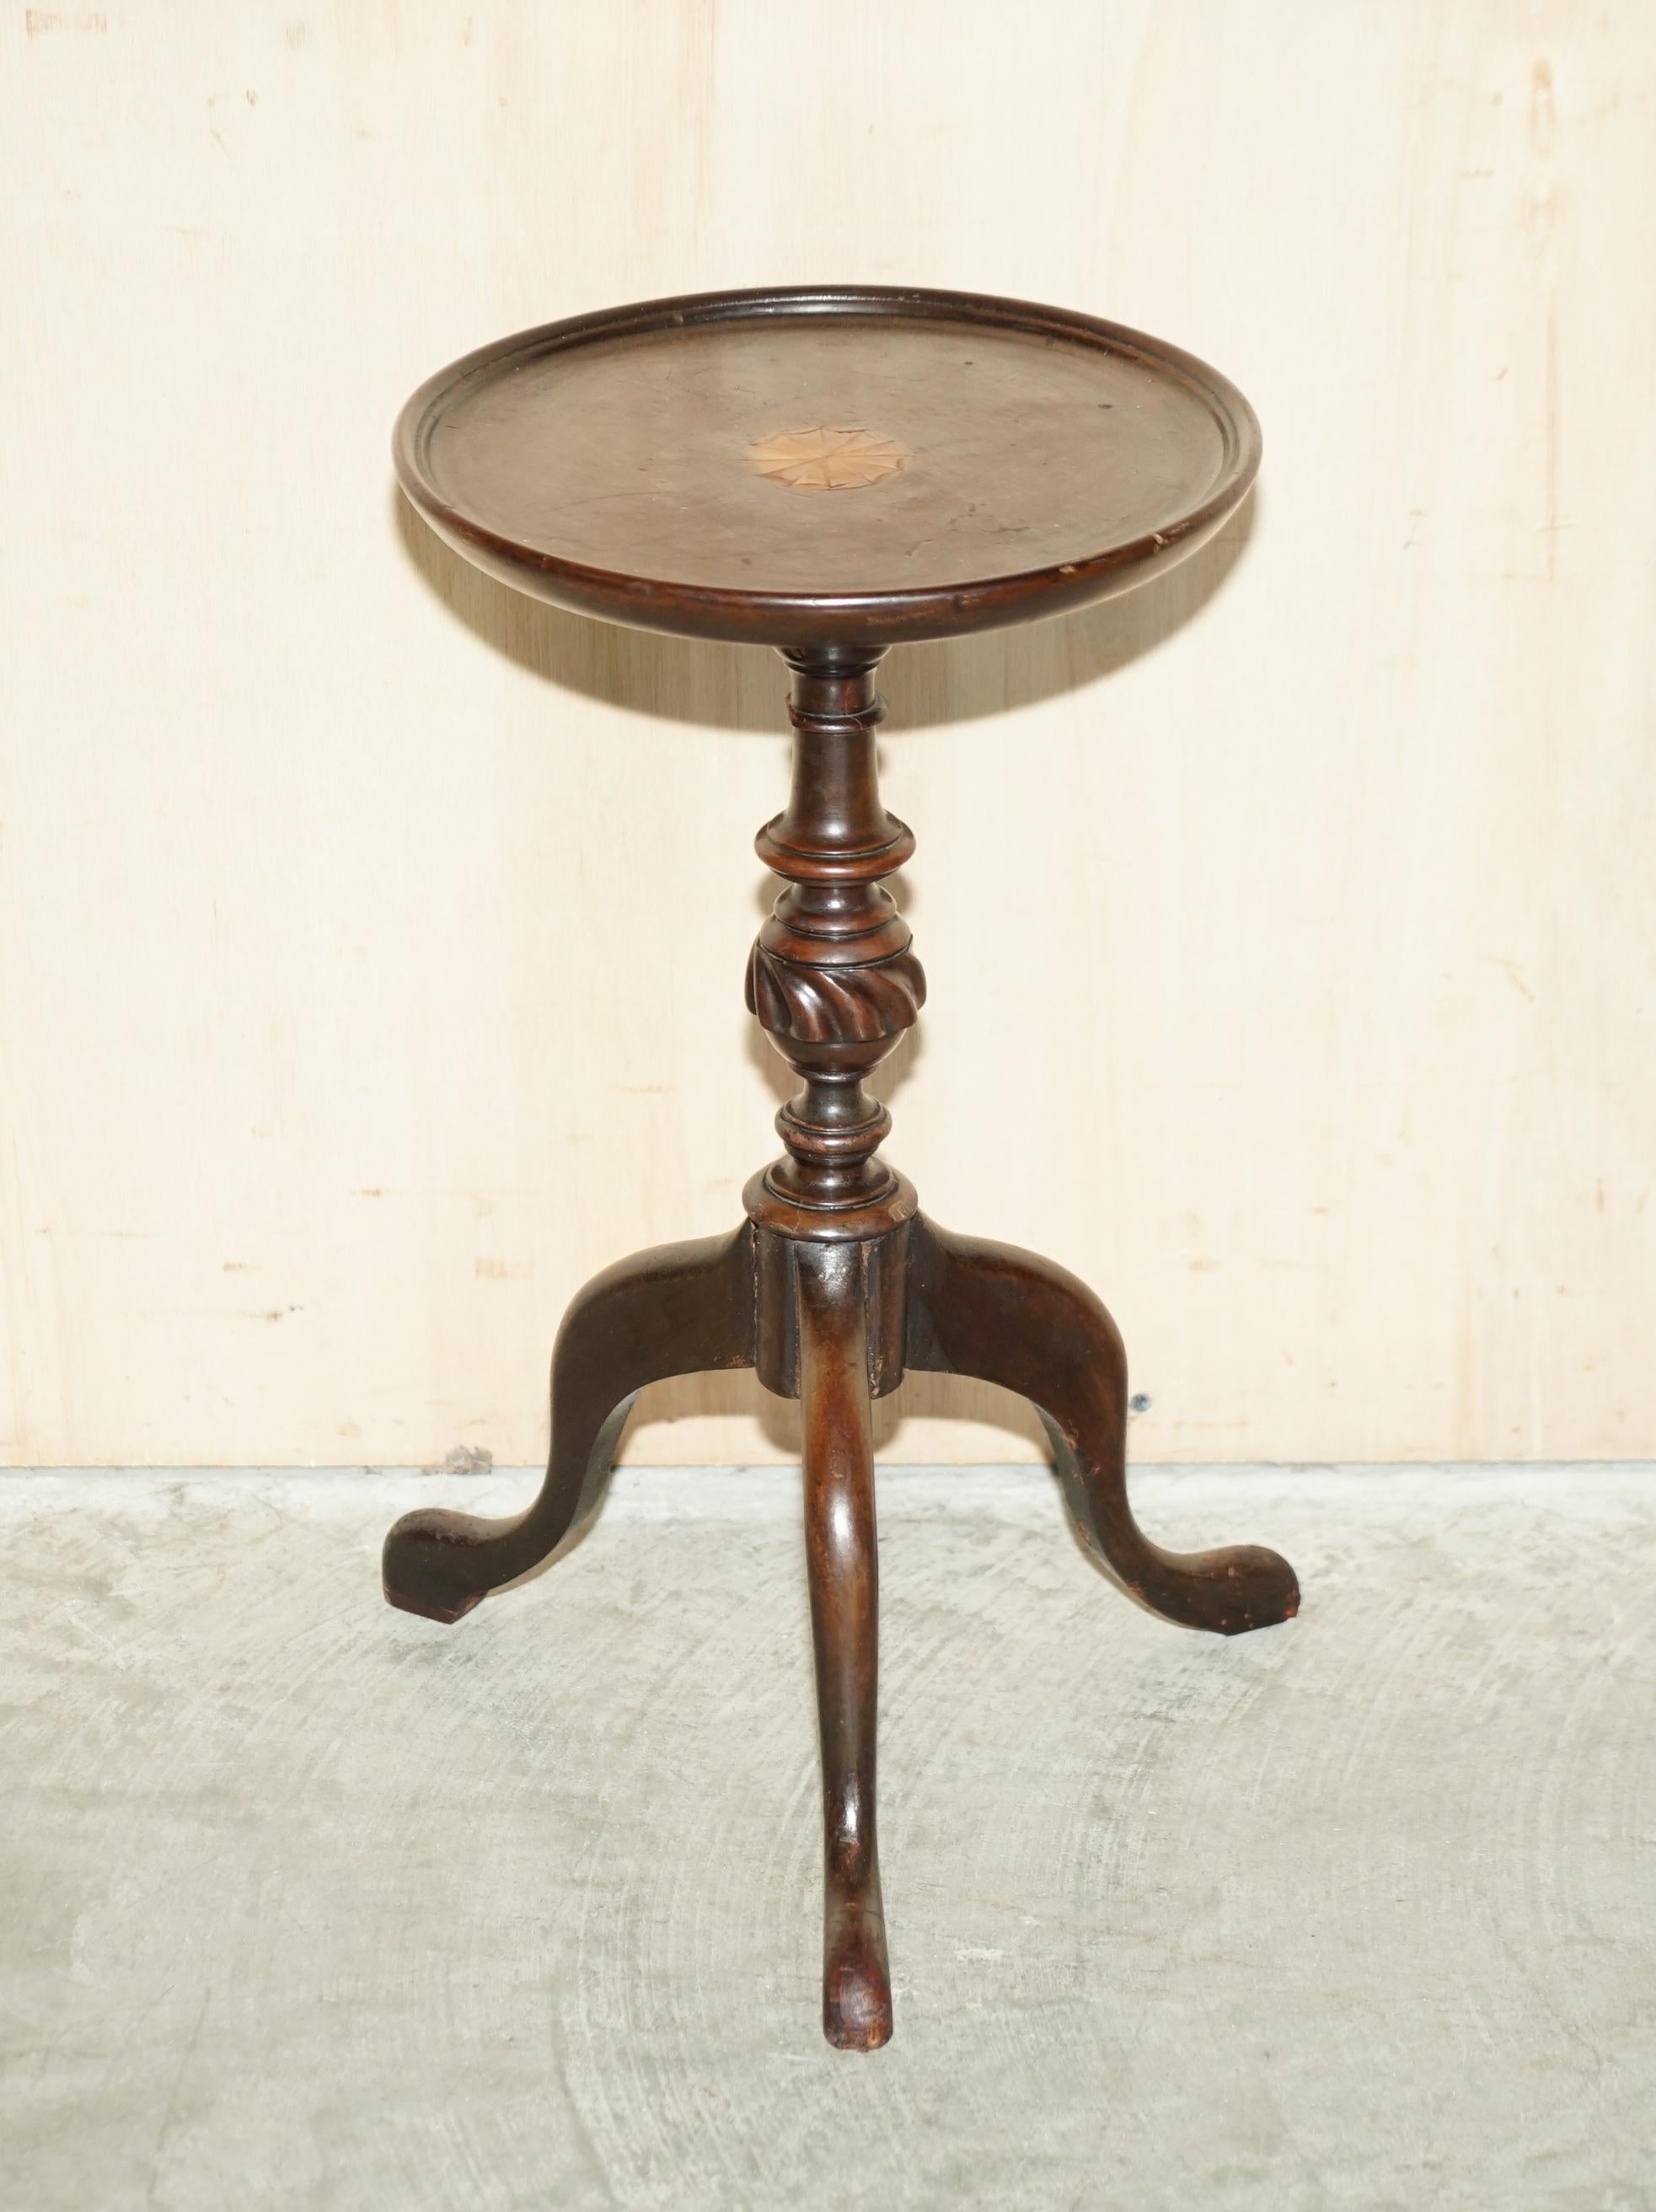 Royal House Antiques

Royal House Antiques is delighted to offer for sale this lovely small late Victorian Sheraton Revival tripod table 

Please note the delivery fee listed is just a guide, it covers within the M25 only for the UK and local Europe